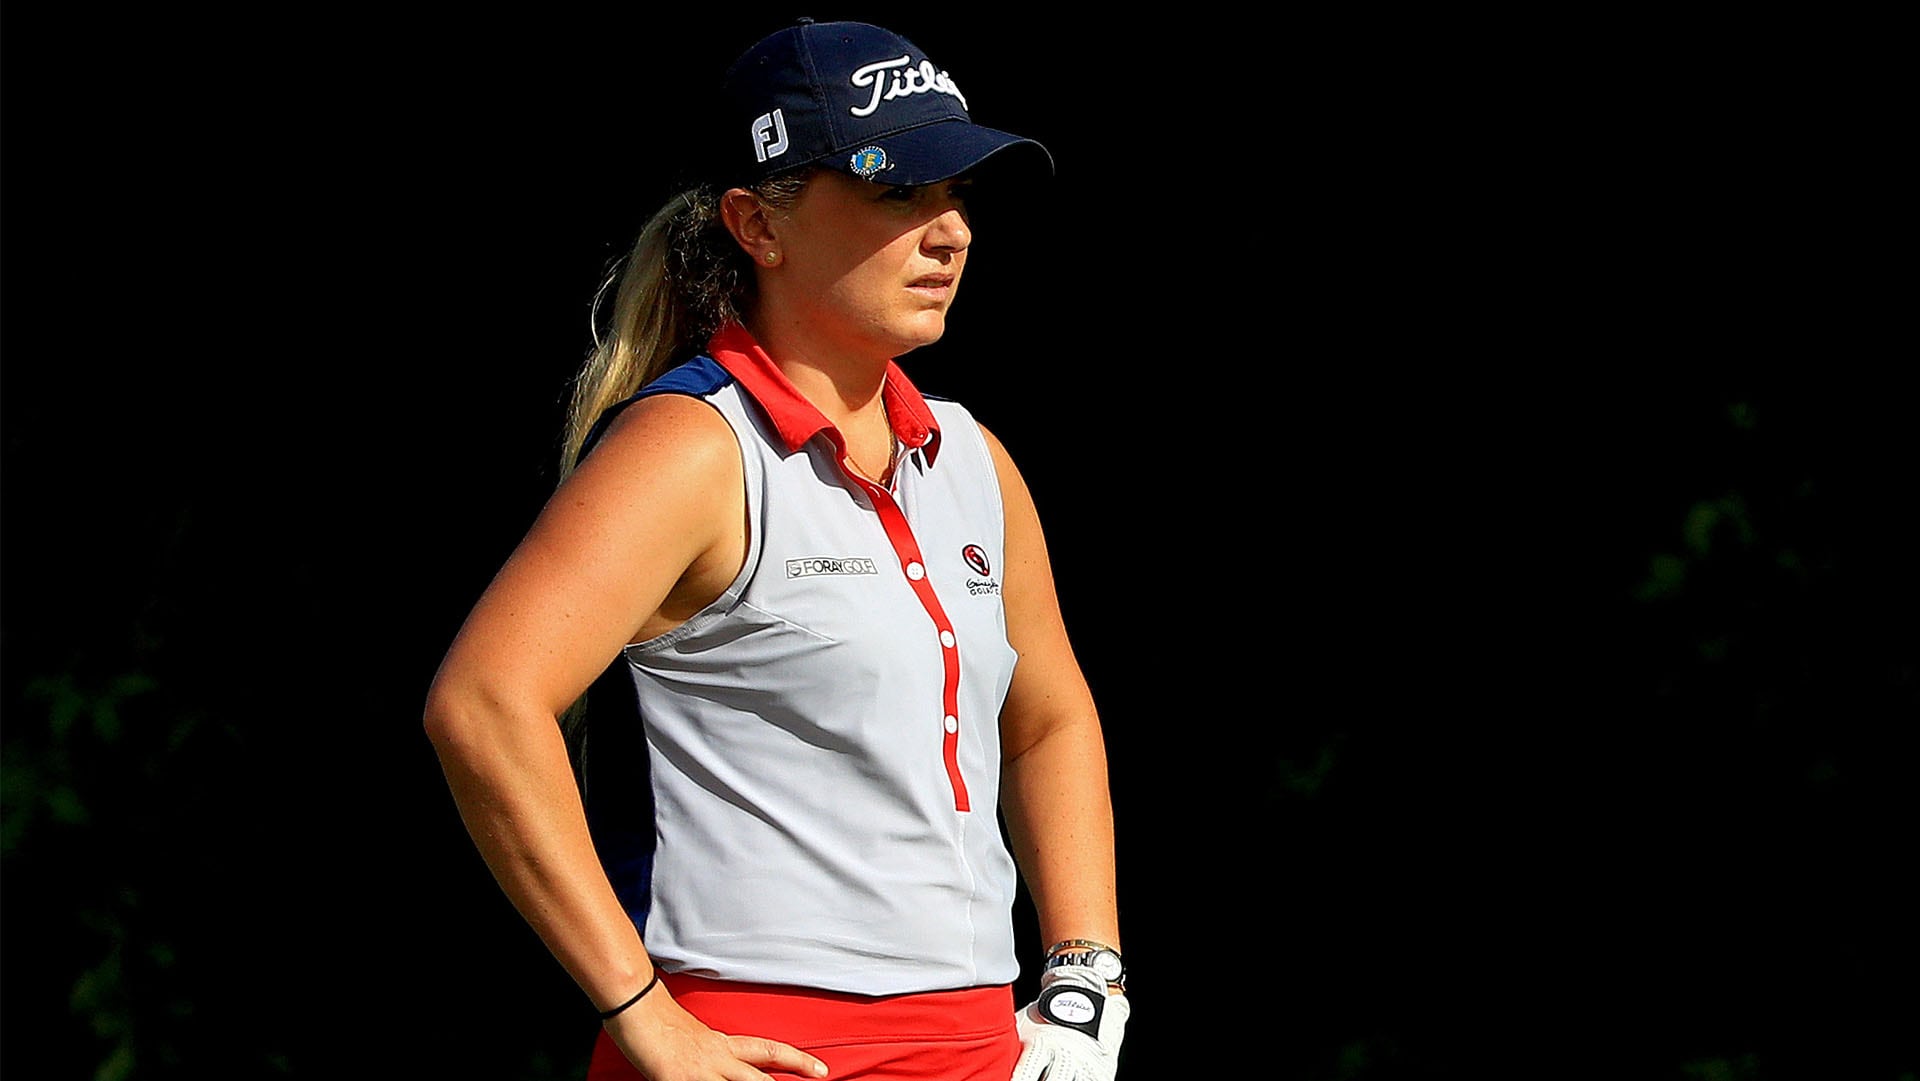 LPGA players excited to return, ready to adapt to COVID-19 changes